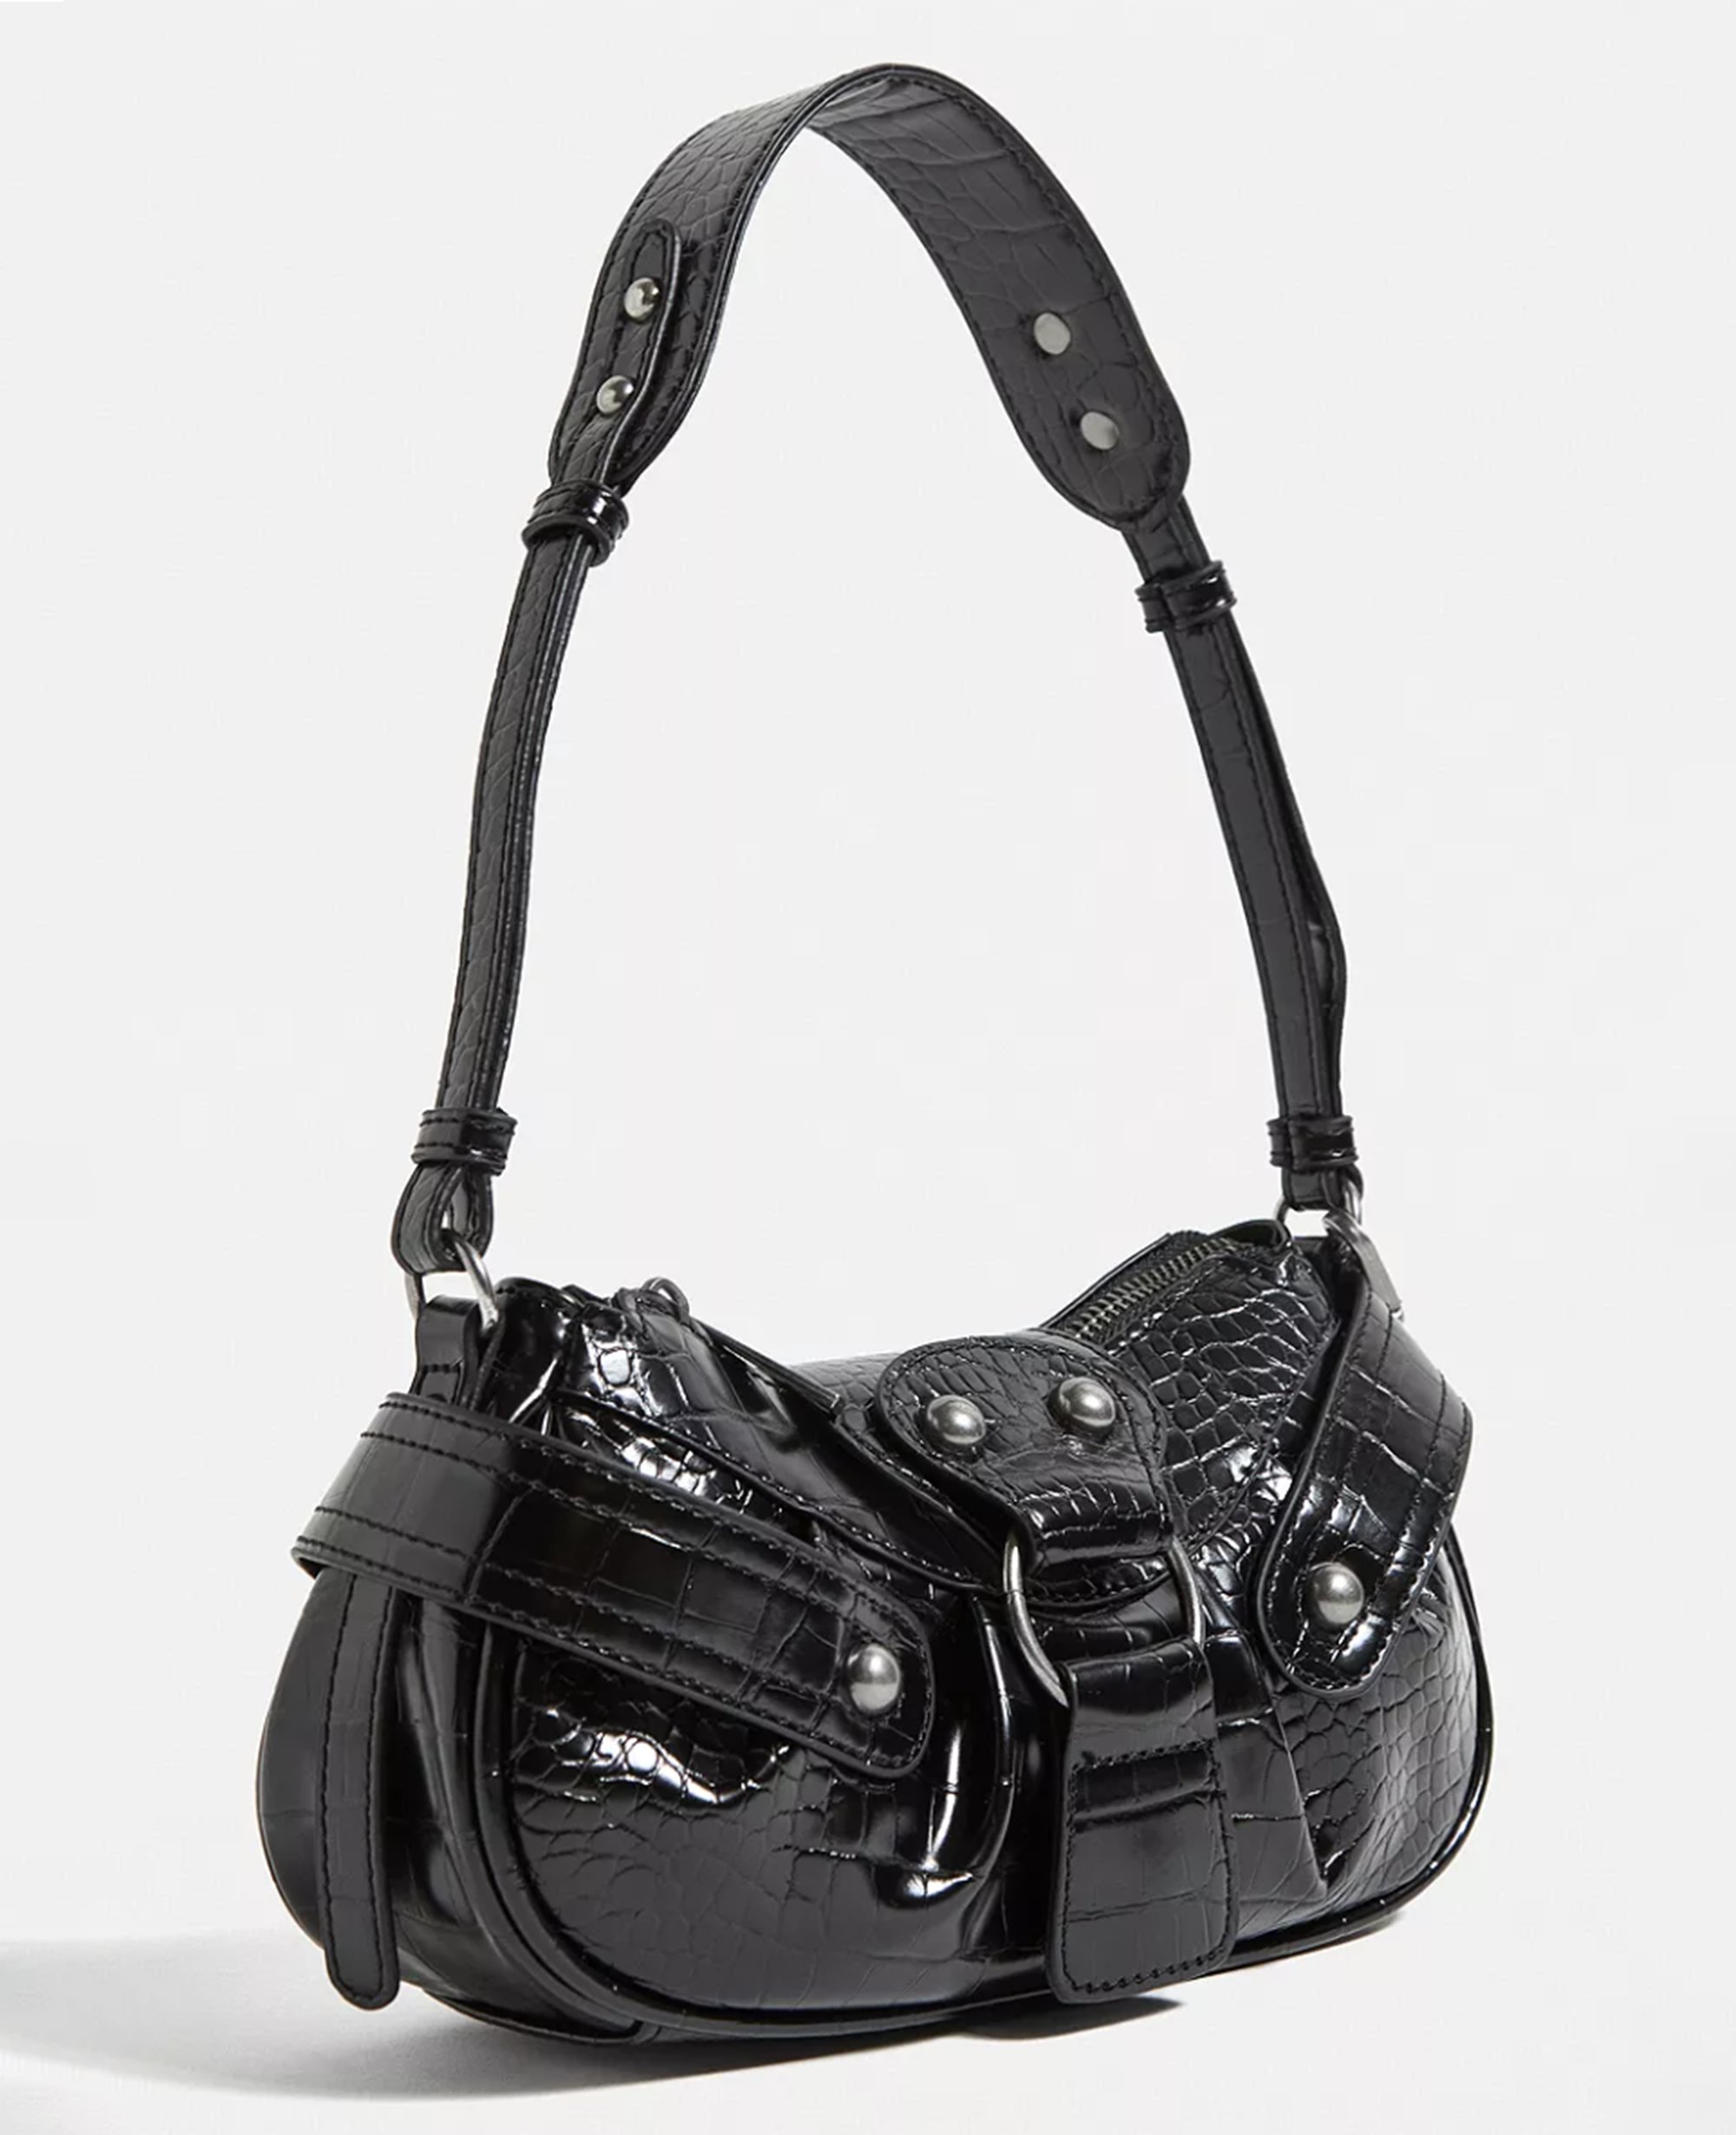 Prada Re-Edition Bag Dupes From £5! - SURGEOFSTYLE by Benita